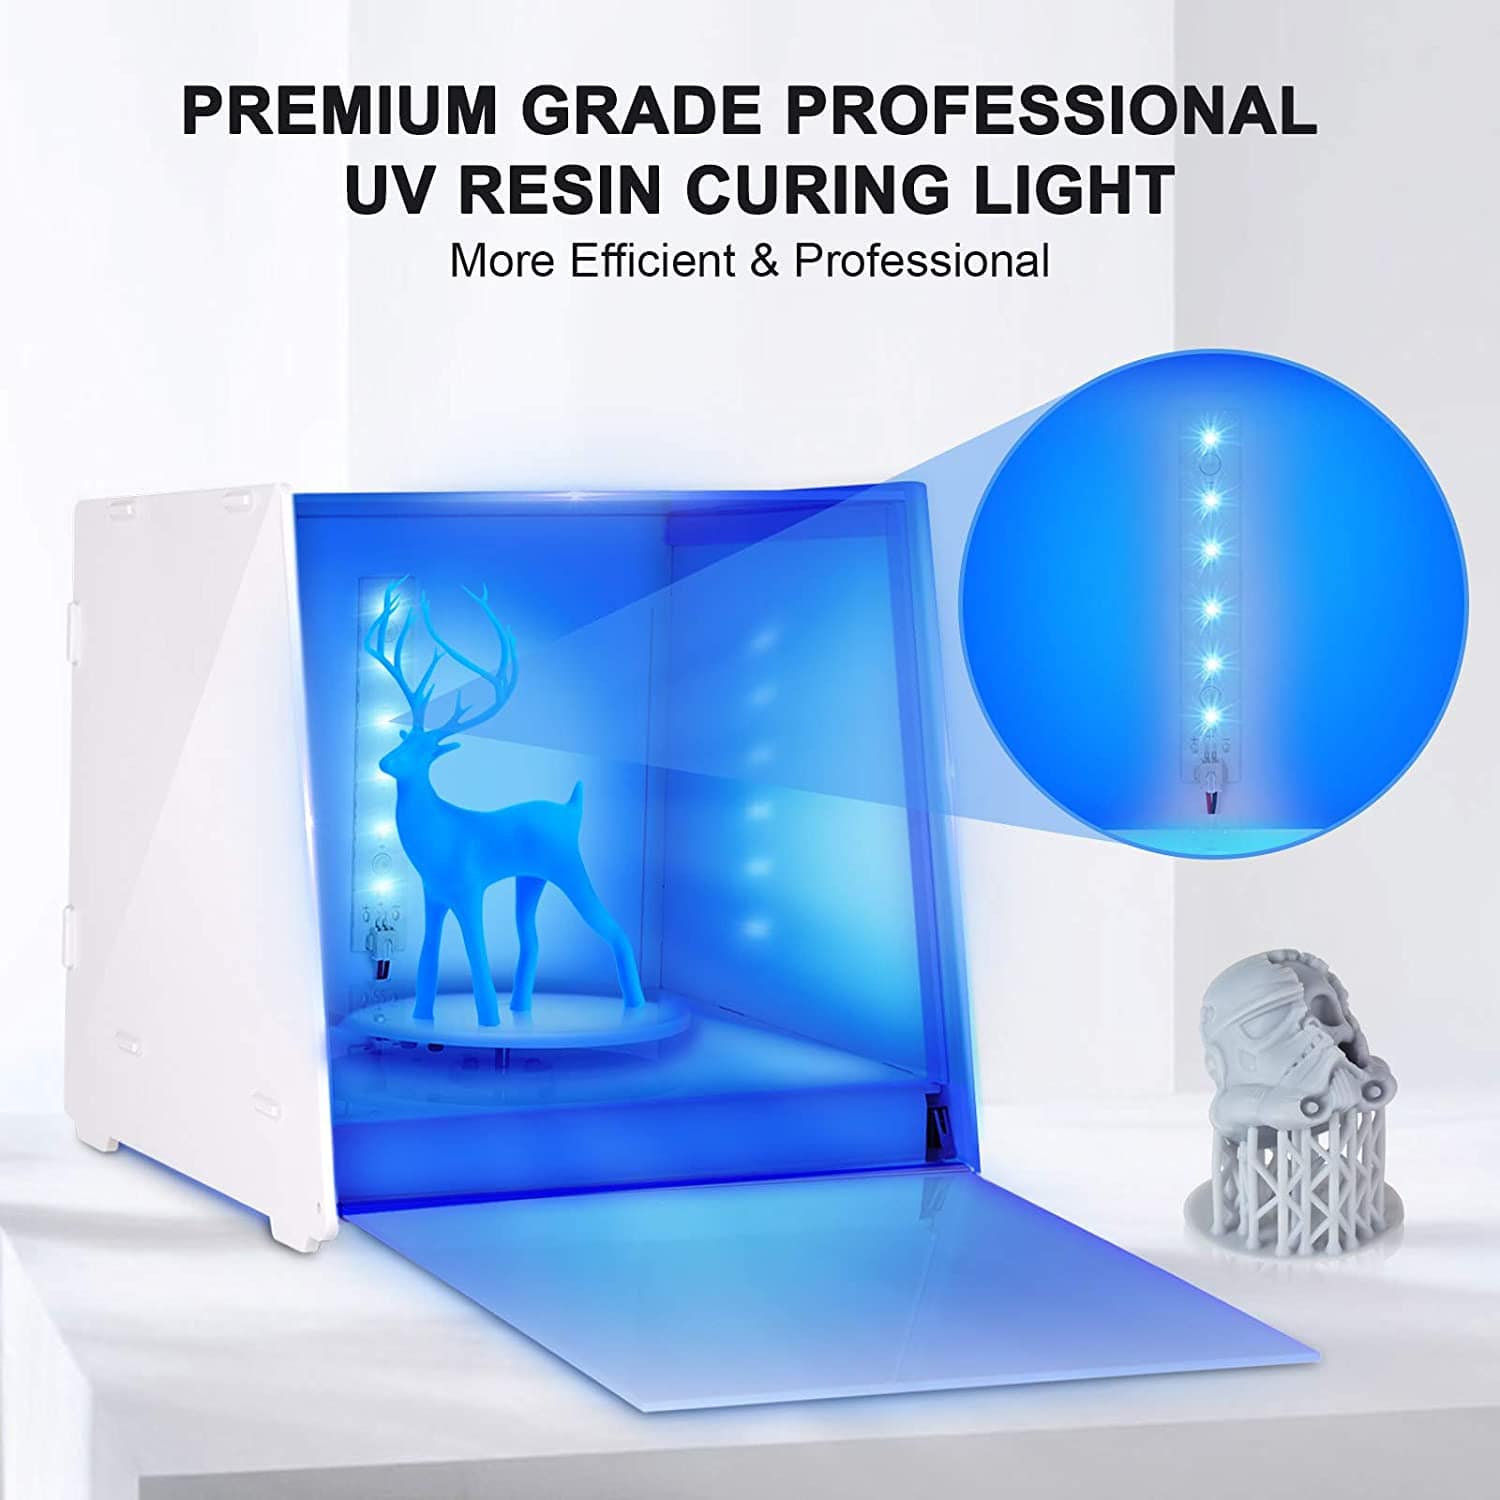 xcvoc UV Resin Light Lamp Curing for Crafts Epoxy,3D Printer UV Resin Curing Light for SLA/DLP/LCD 3D Printing Resin Curing Station/Machine/Lamp/Box